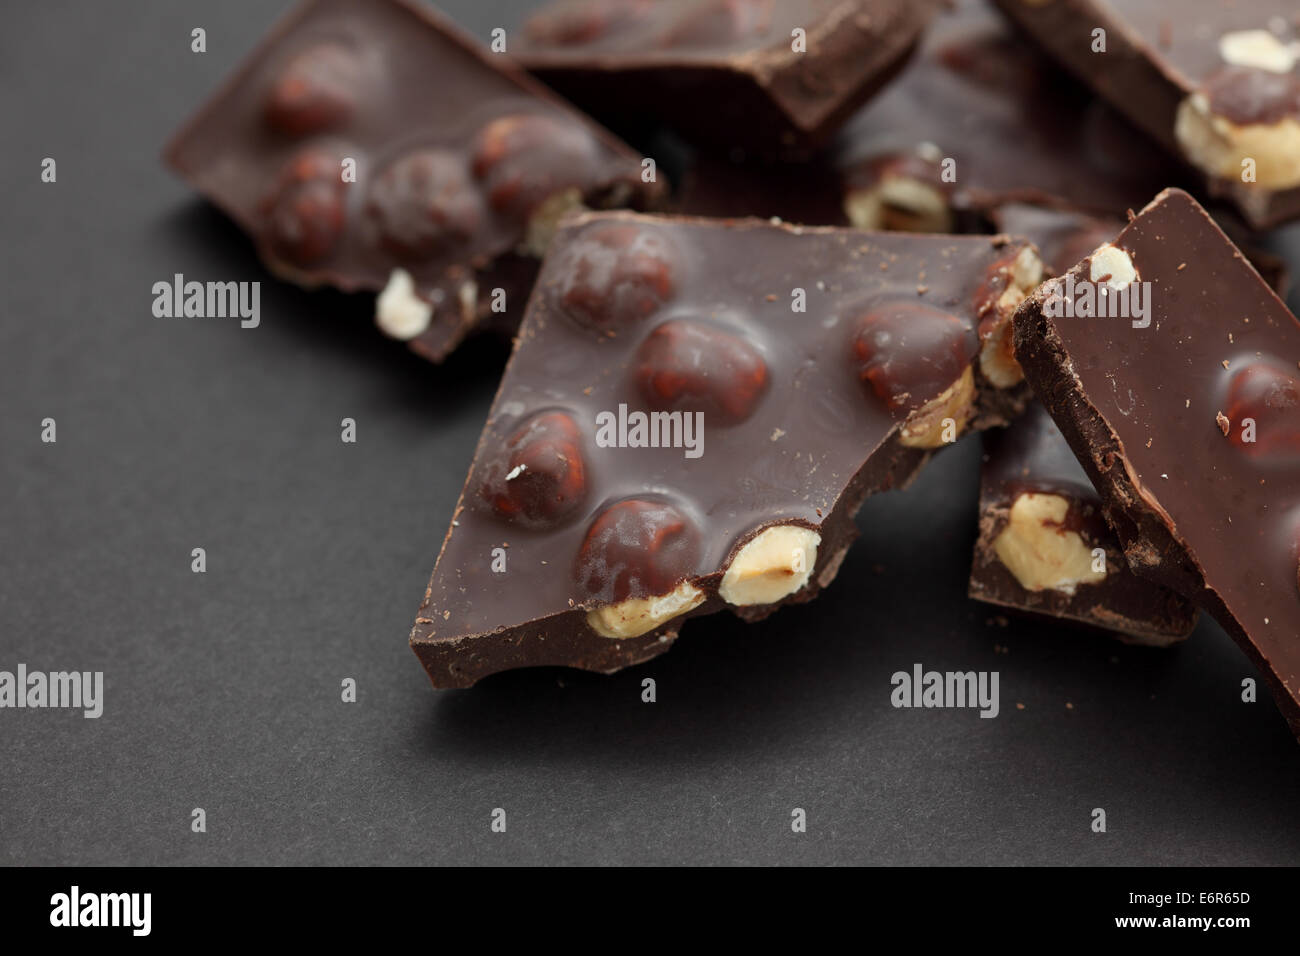 Pieces of chocolate on black background. Close-up. Stock Photo